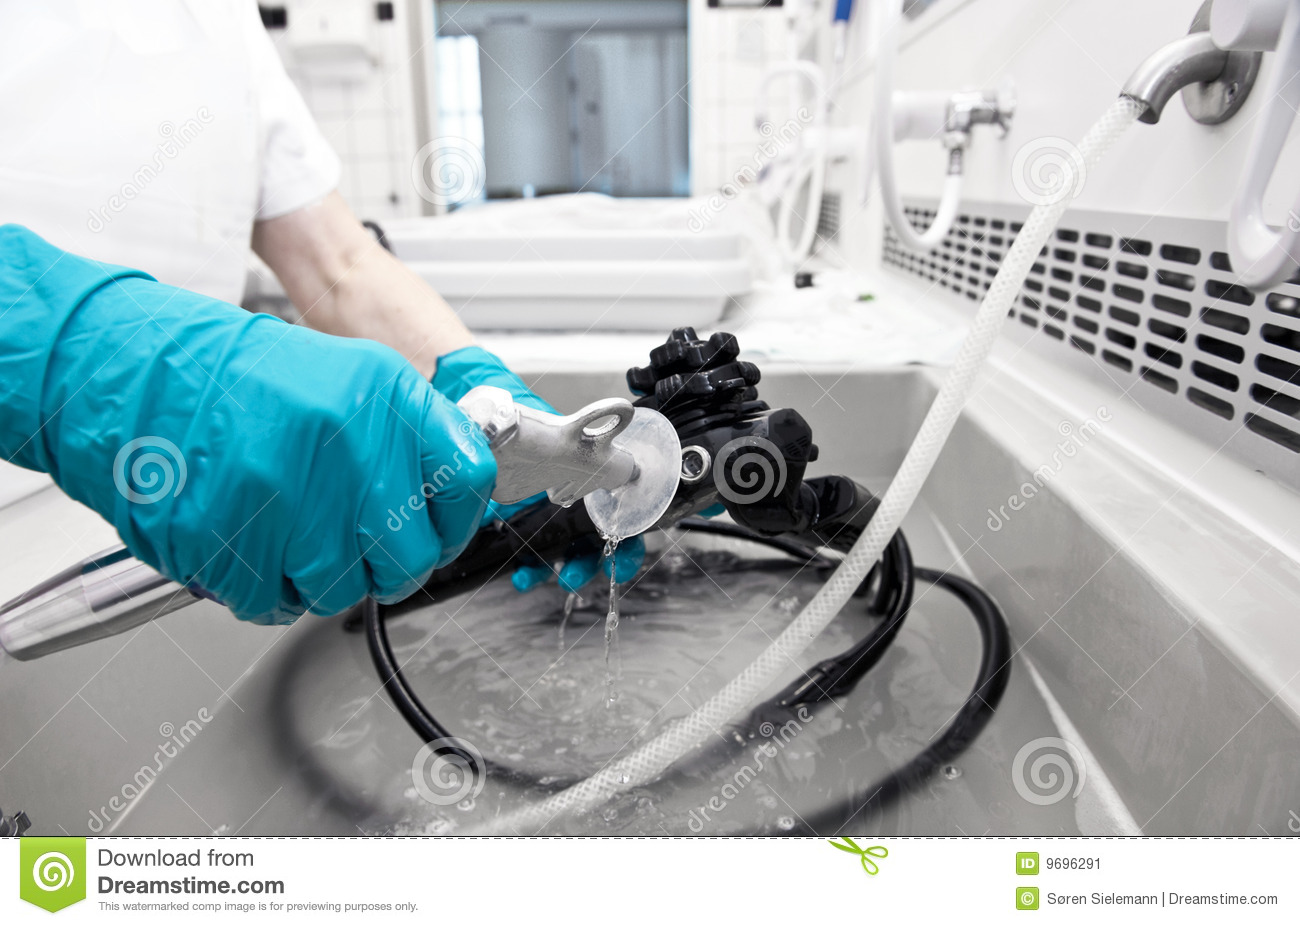 Cleaning Hospital Equipment Stock Image   Image  9696291